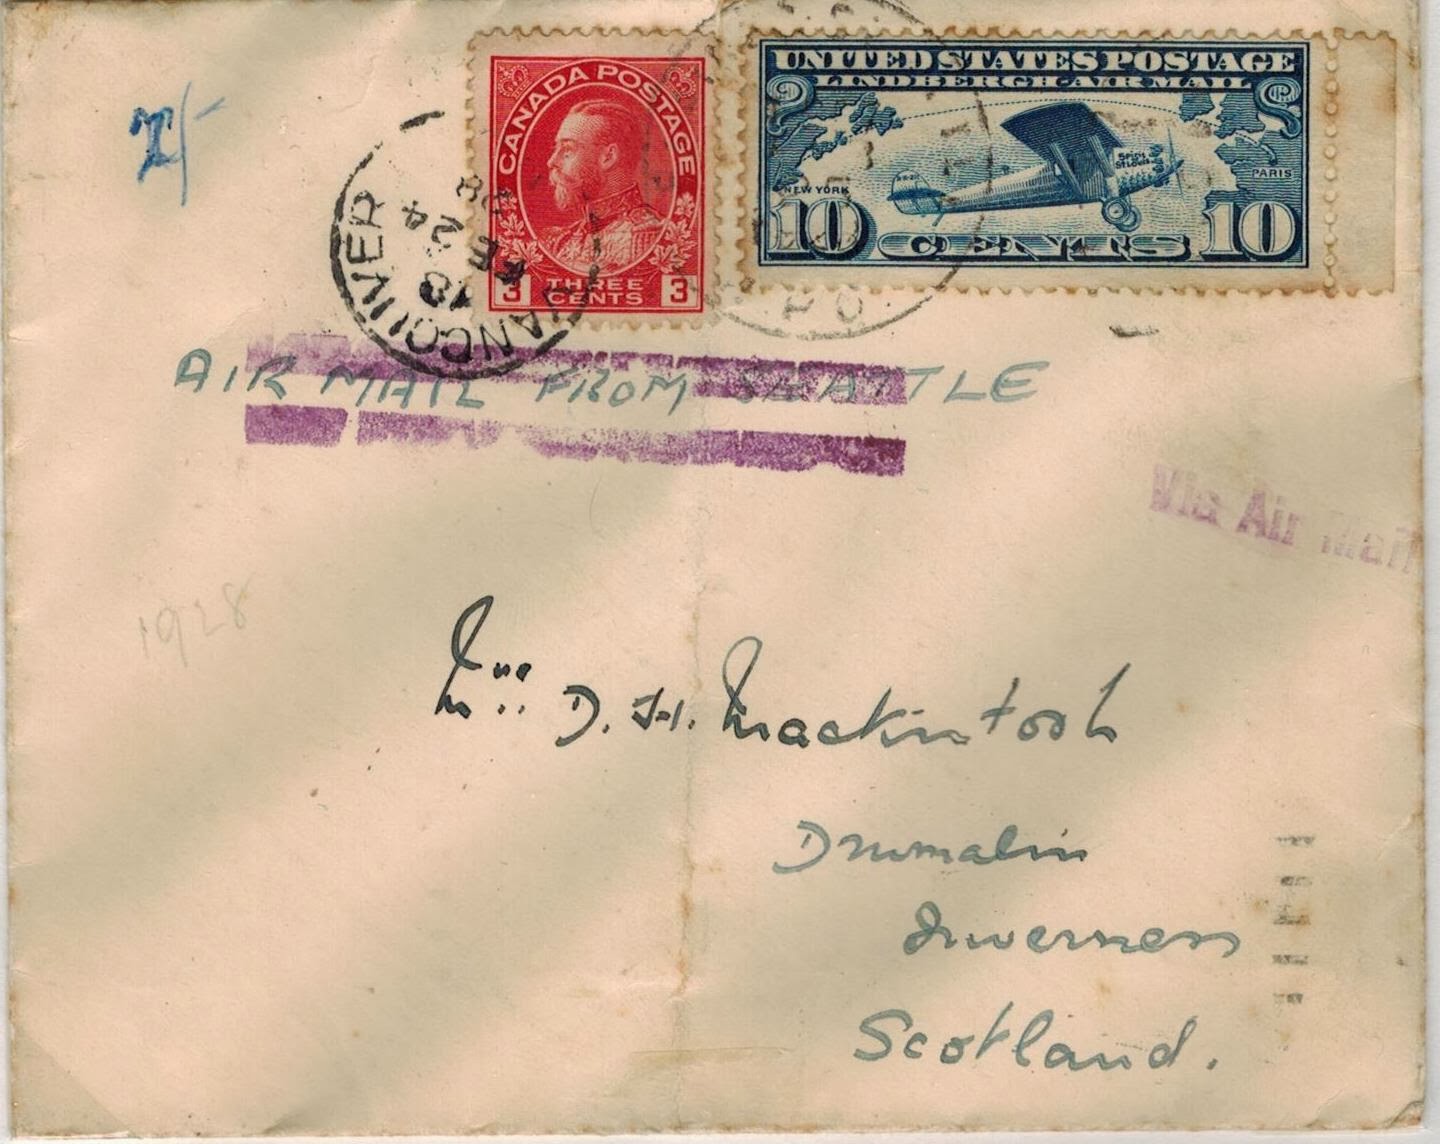 Postal History Corner: 7. Air Mail Letter Rates to the United Kingdom